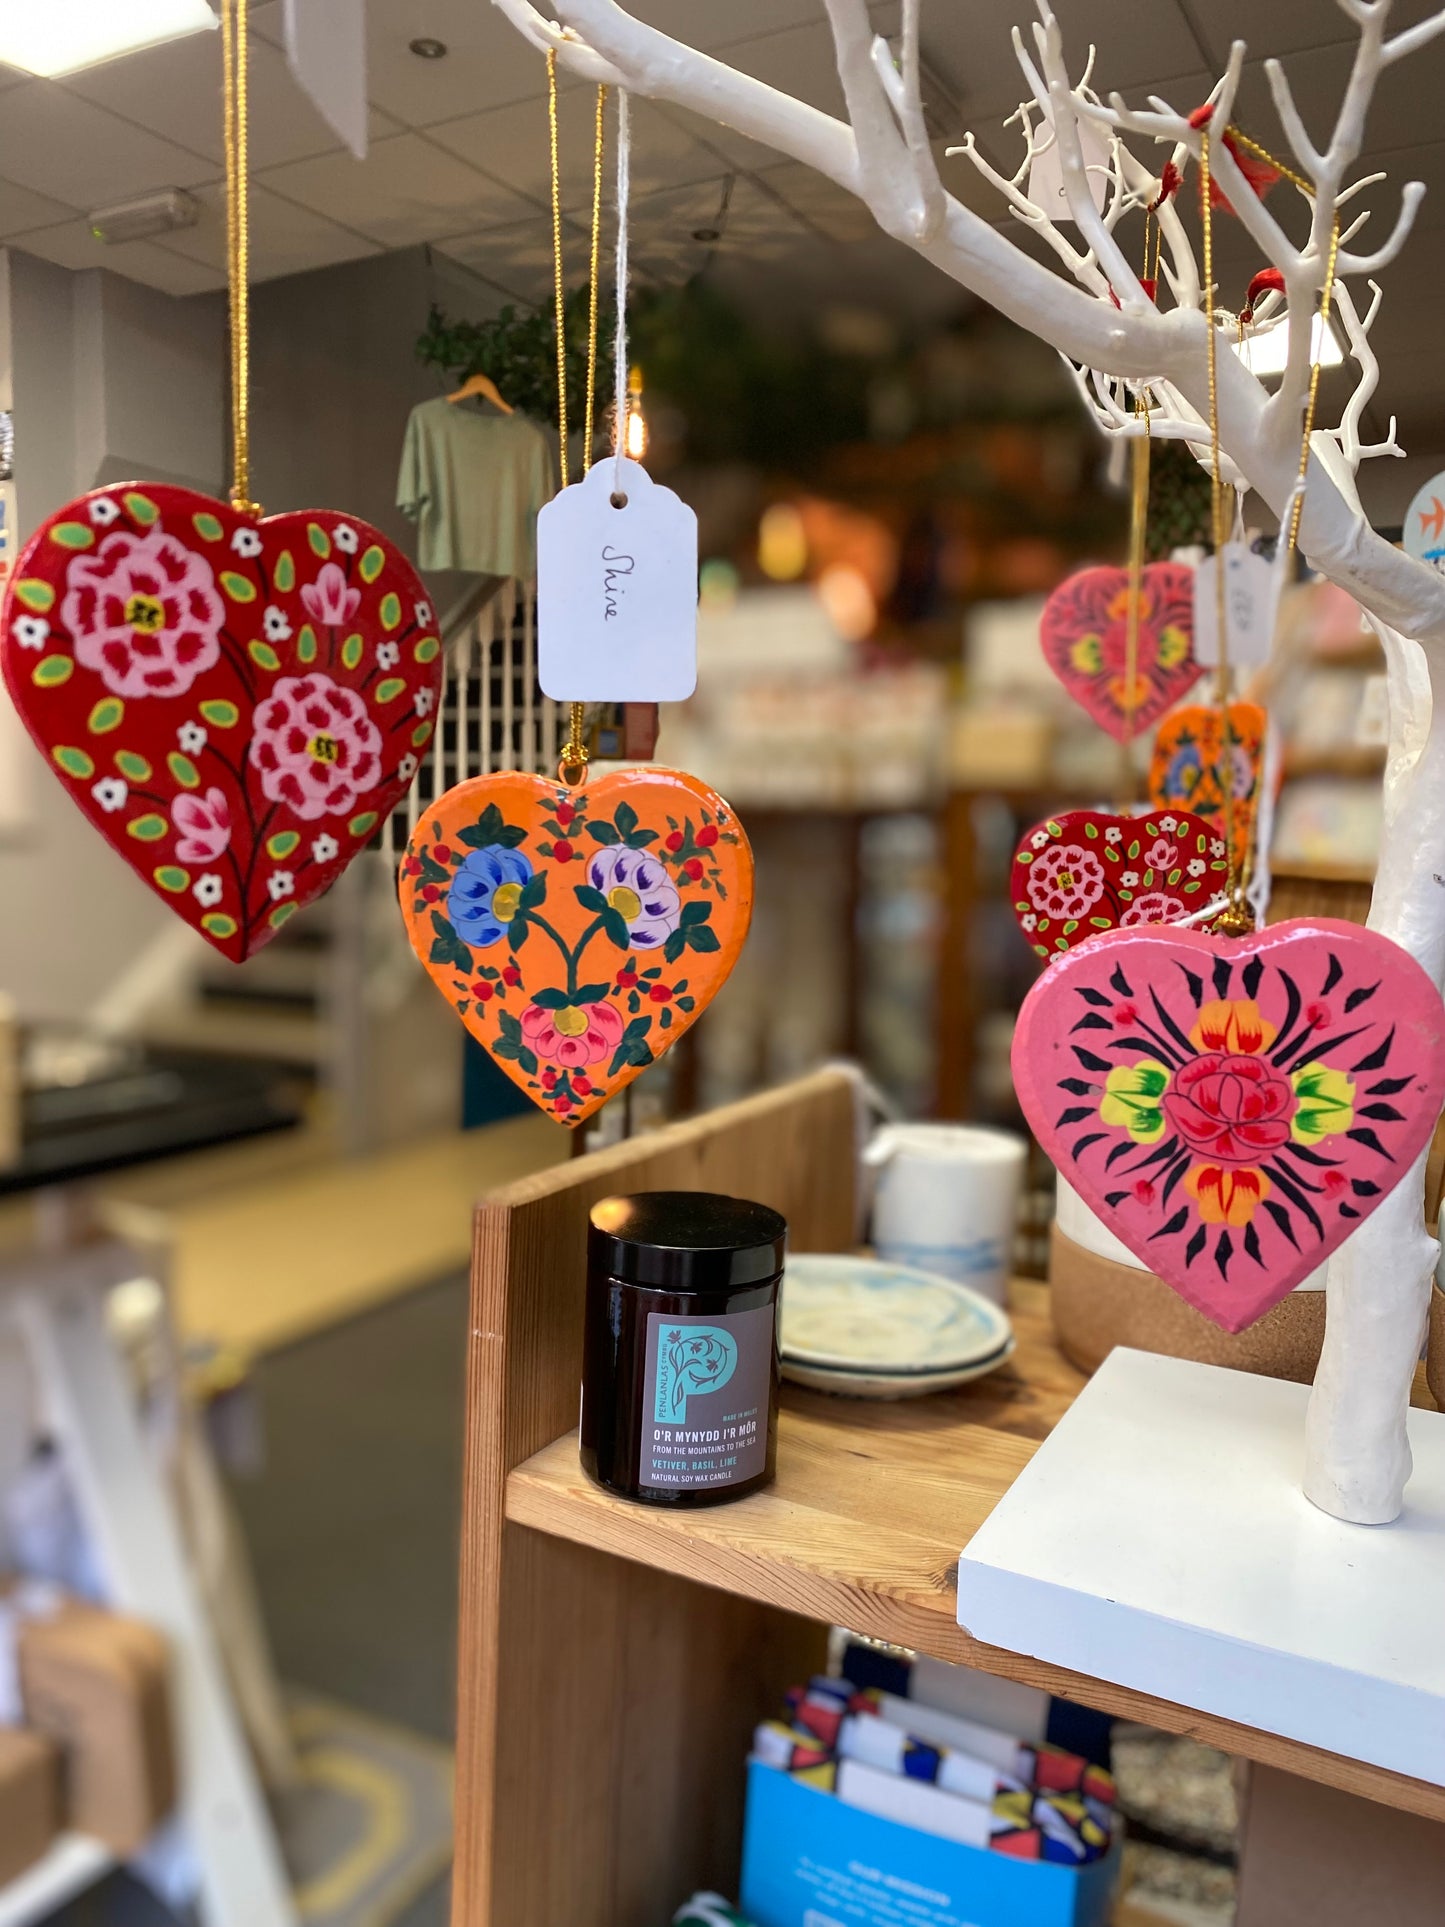 Wooden Heart Decorations